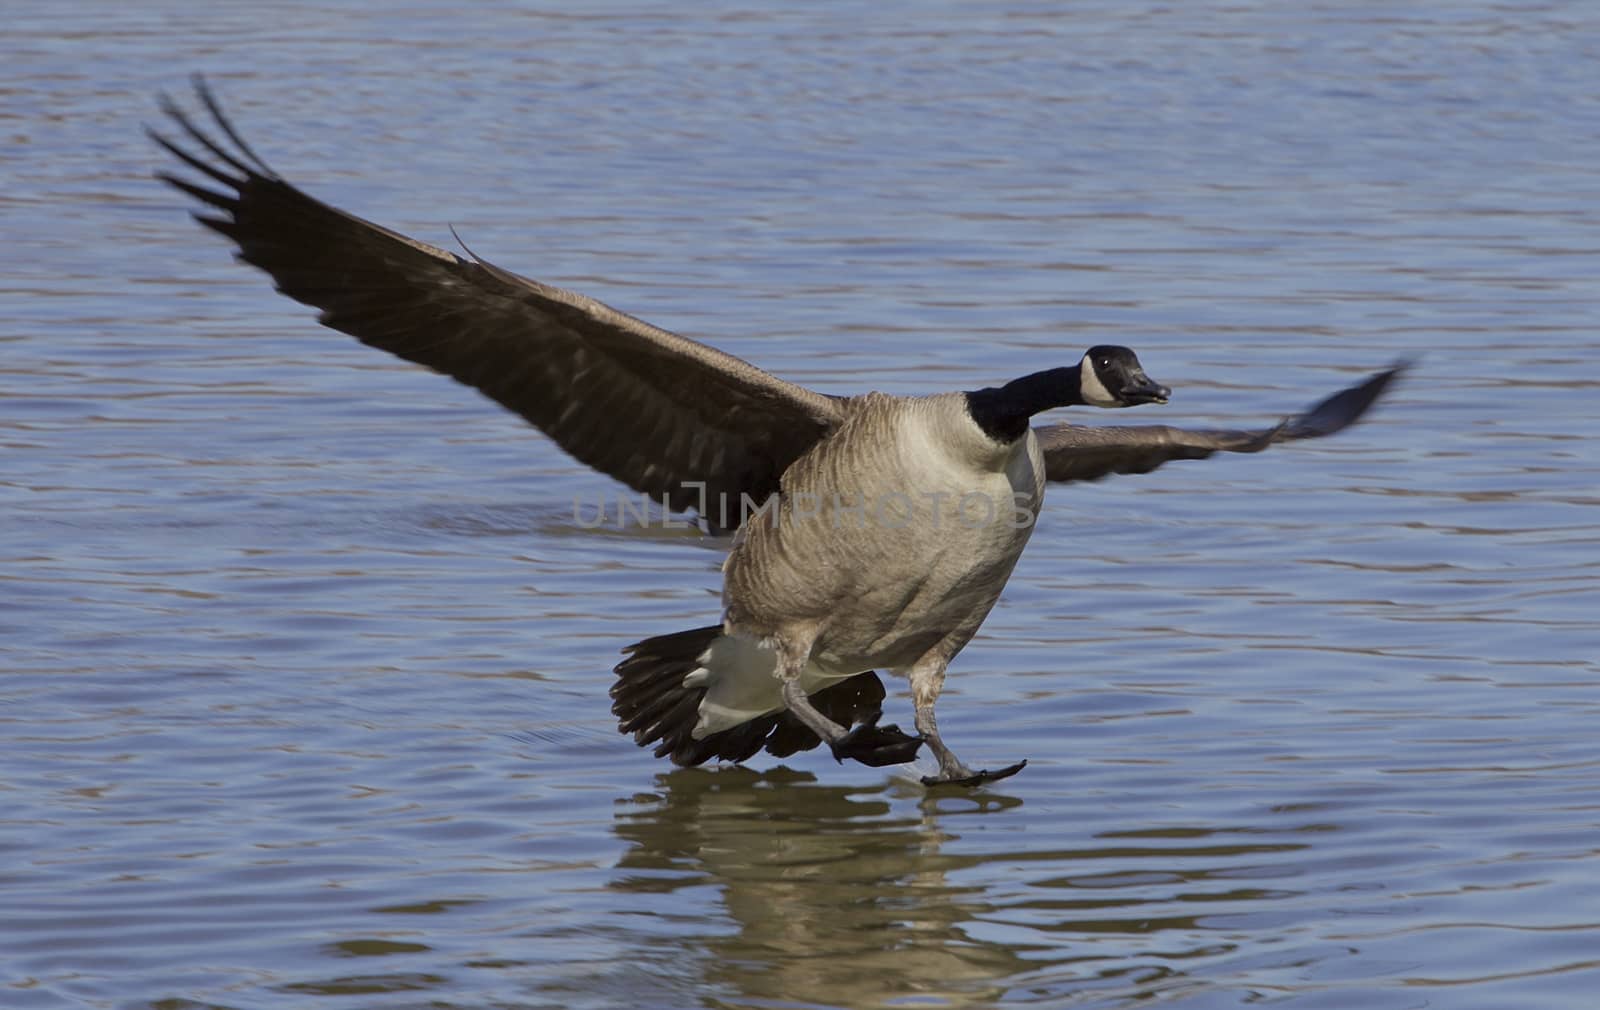 The landing cackling goose by teo